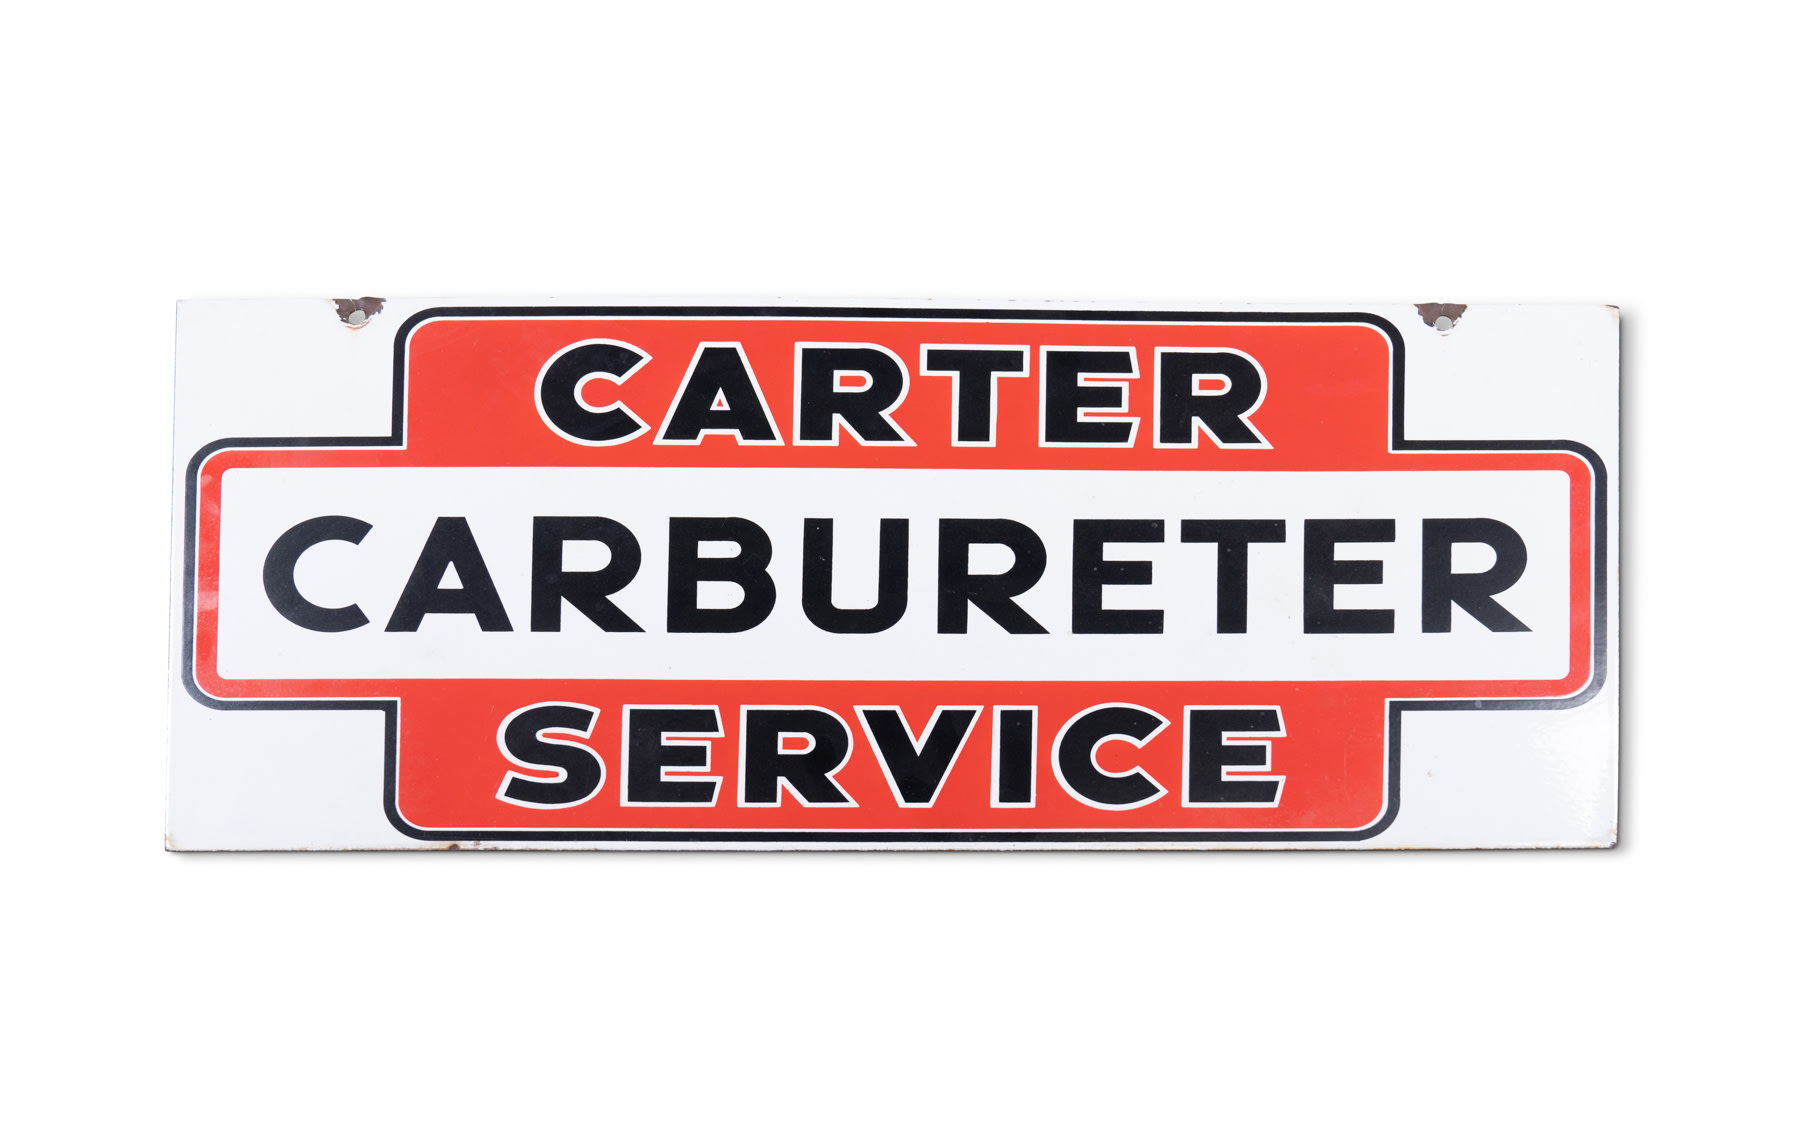 Carter Carbureter Service Sign, Double Sided